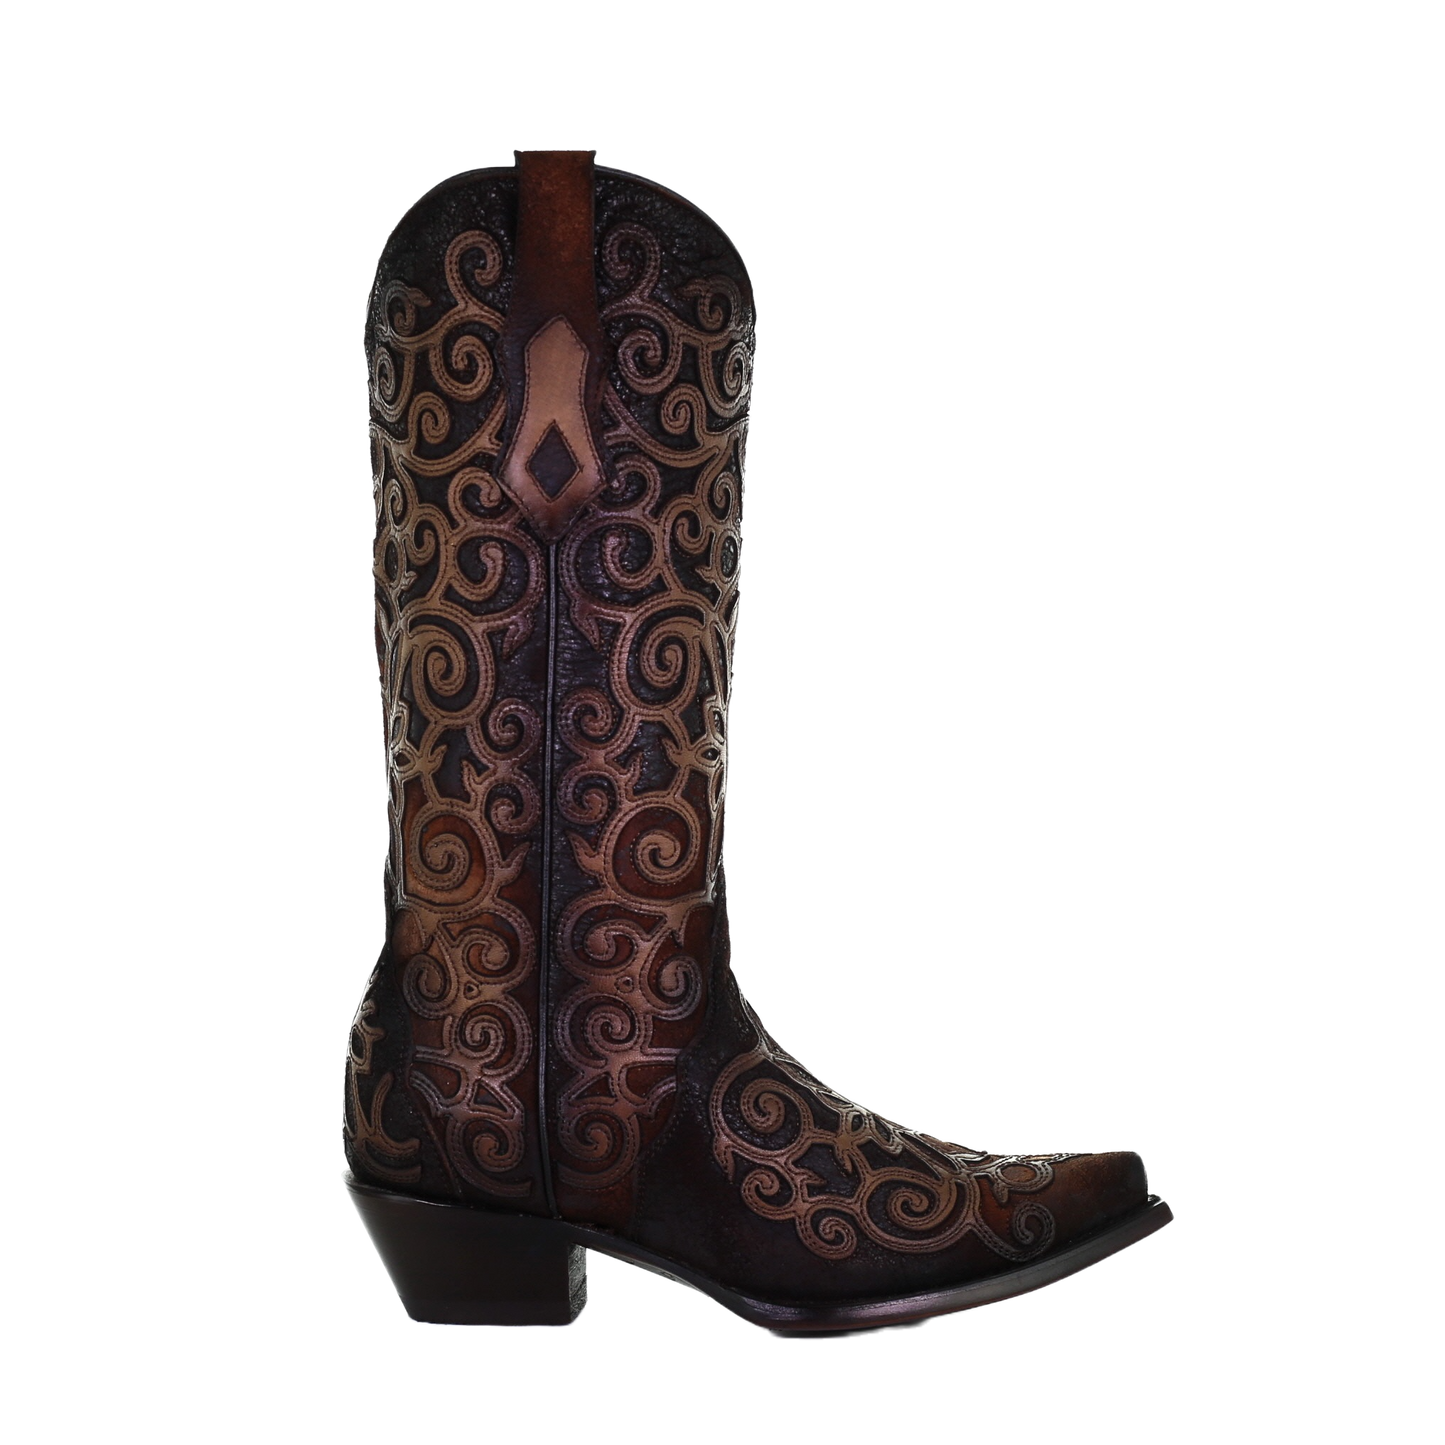 Corral Ladies Chocolate Lamb Overlay with Embroidery Boots C3744